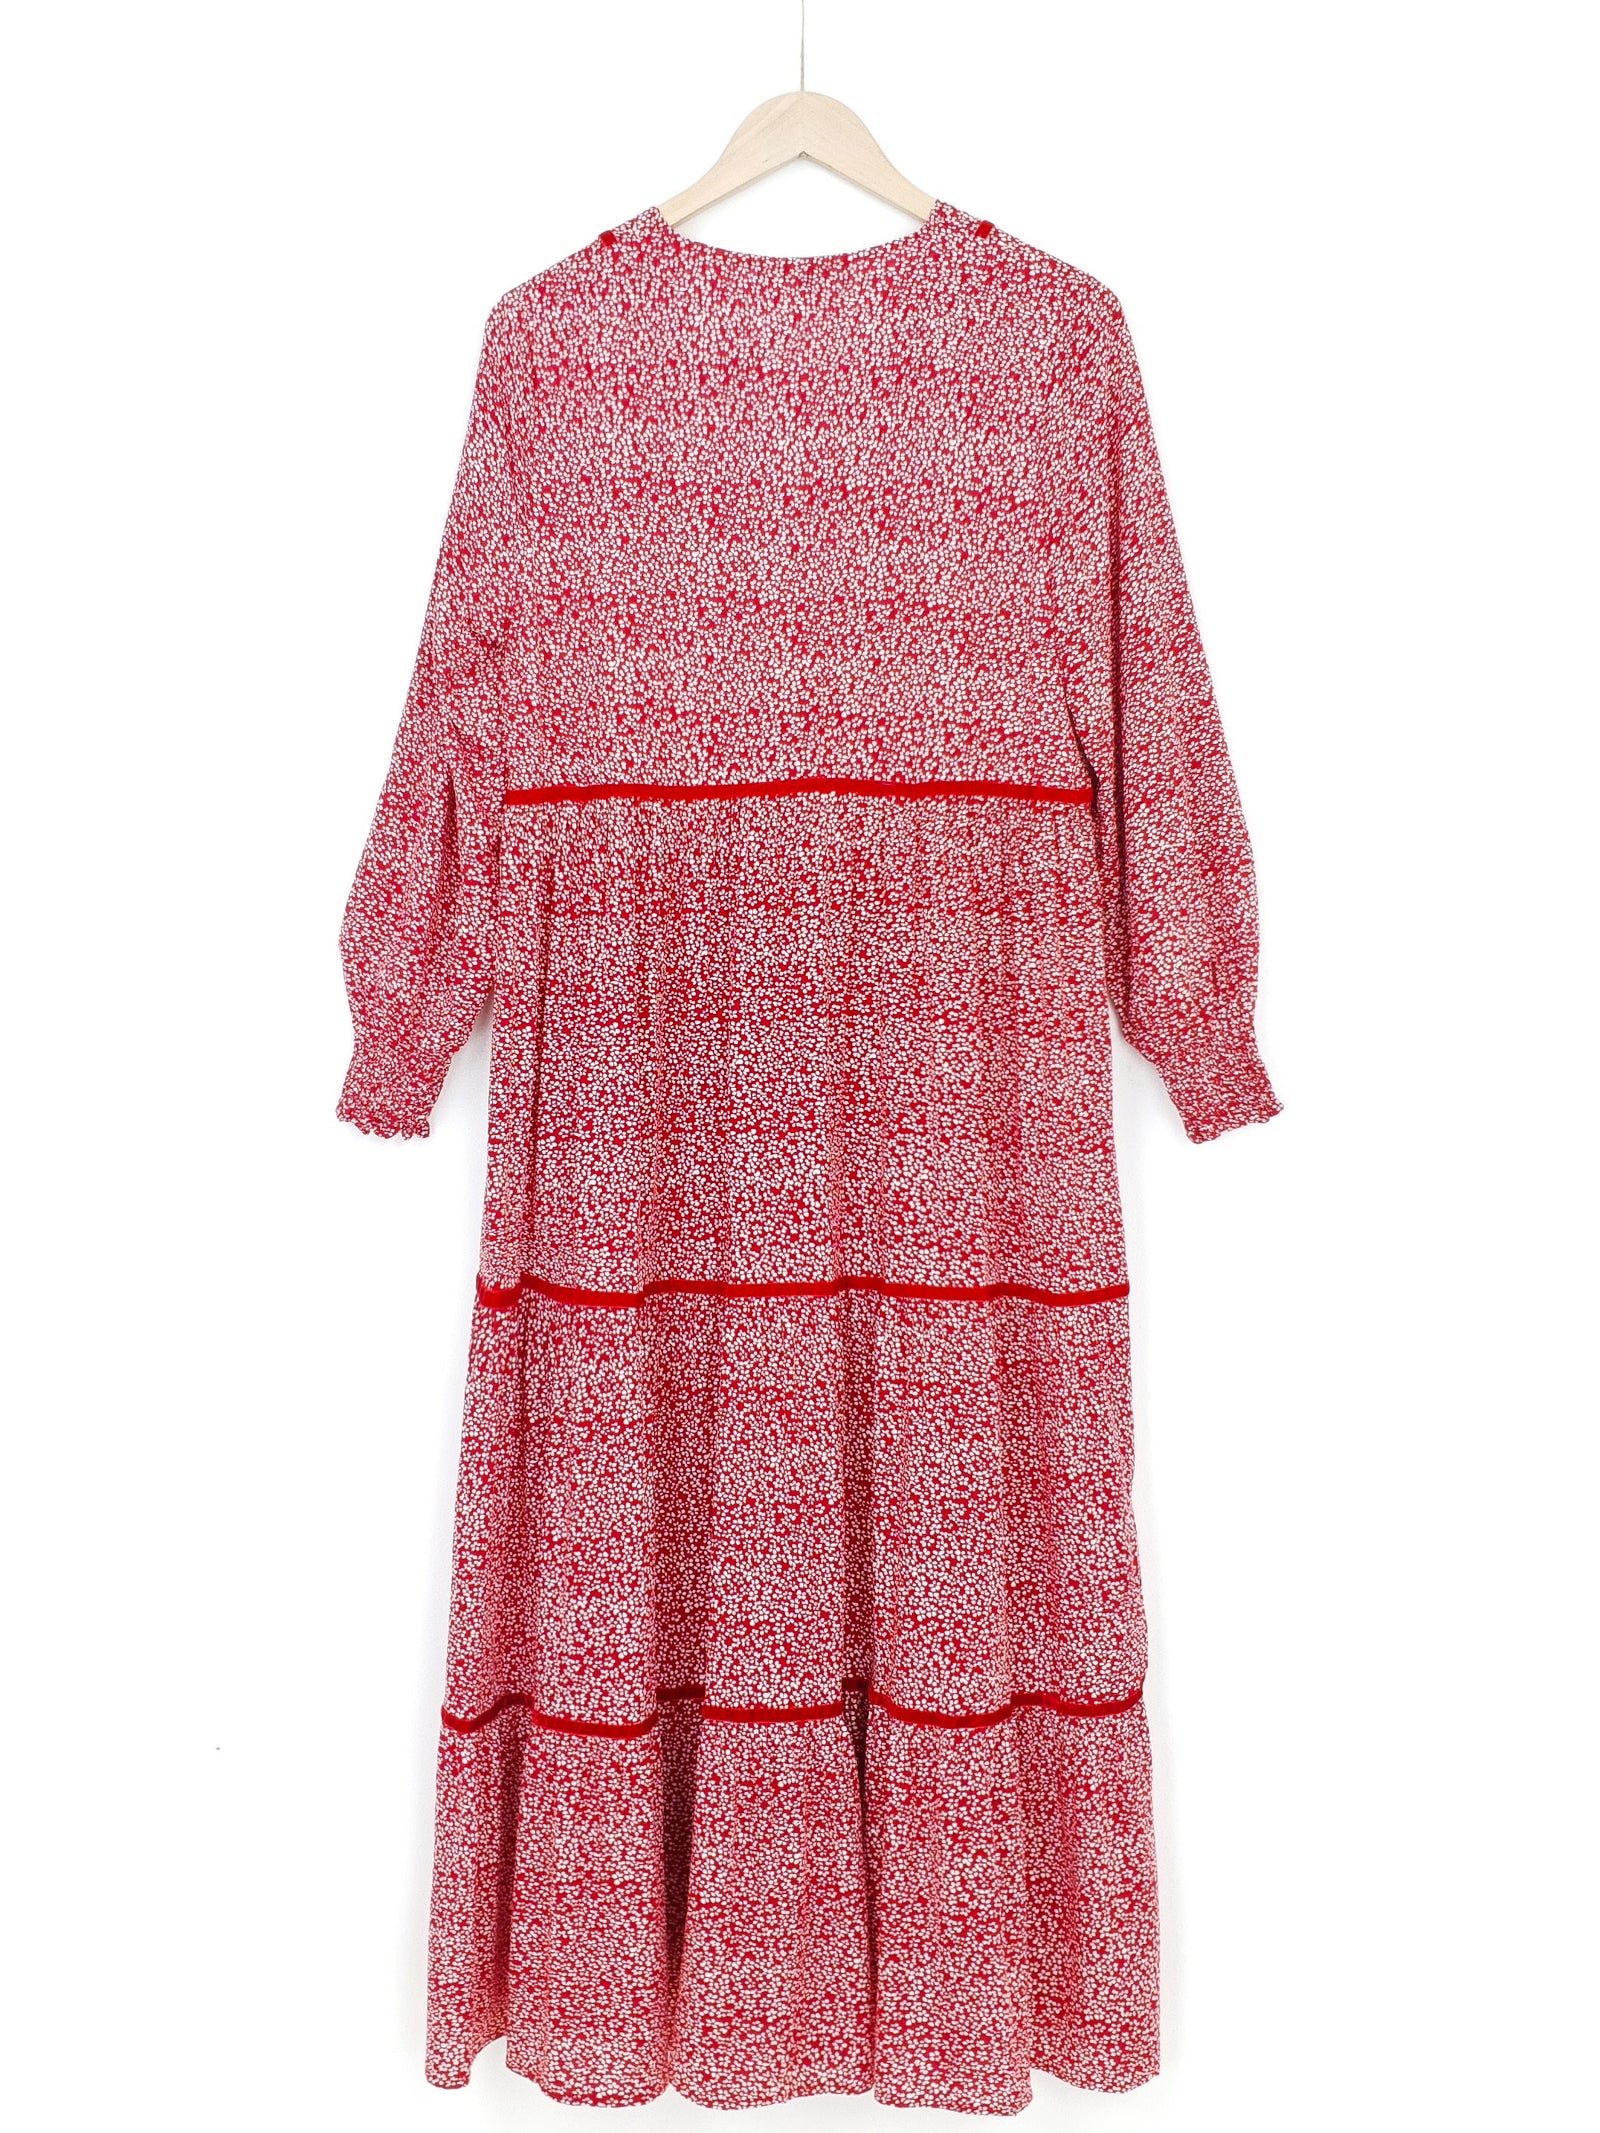 KATO | Patterend Long Dress with Trim | Red